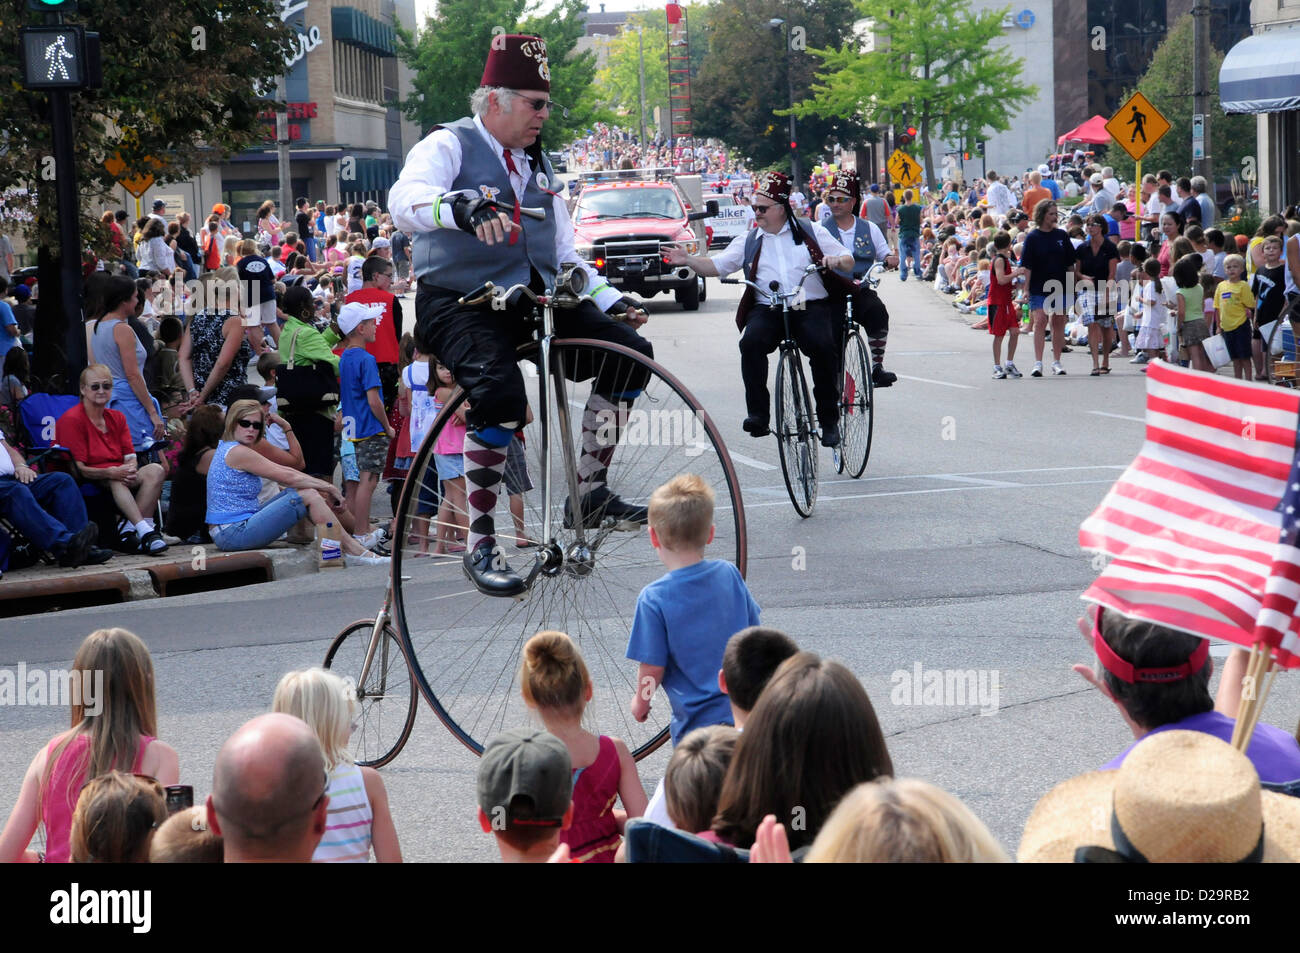 Big Wheel Cyclists In Parade, Janesville, Wisconsin Stock Photo